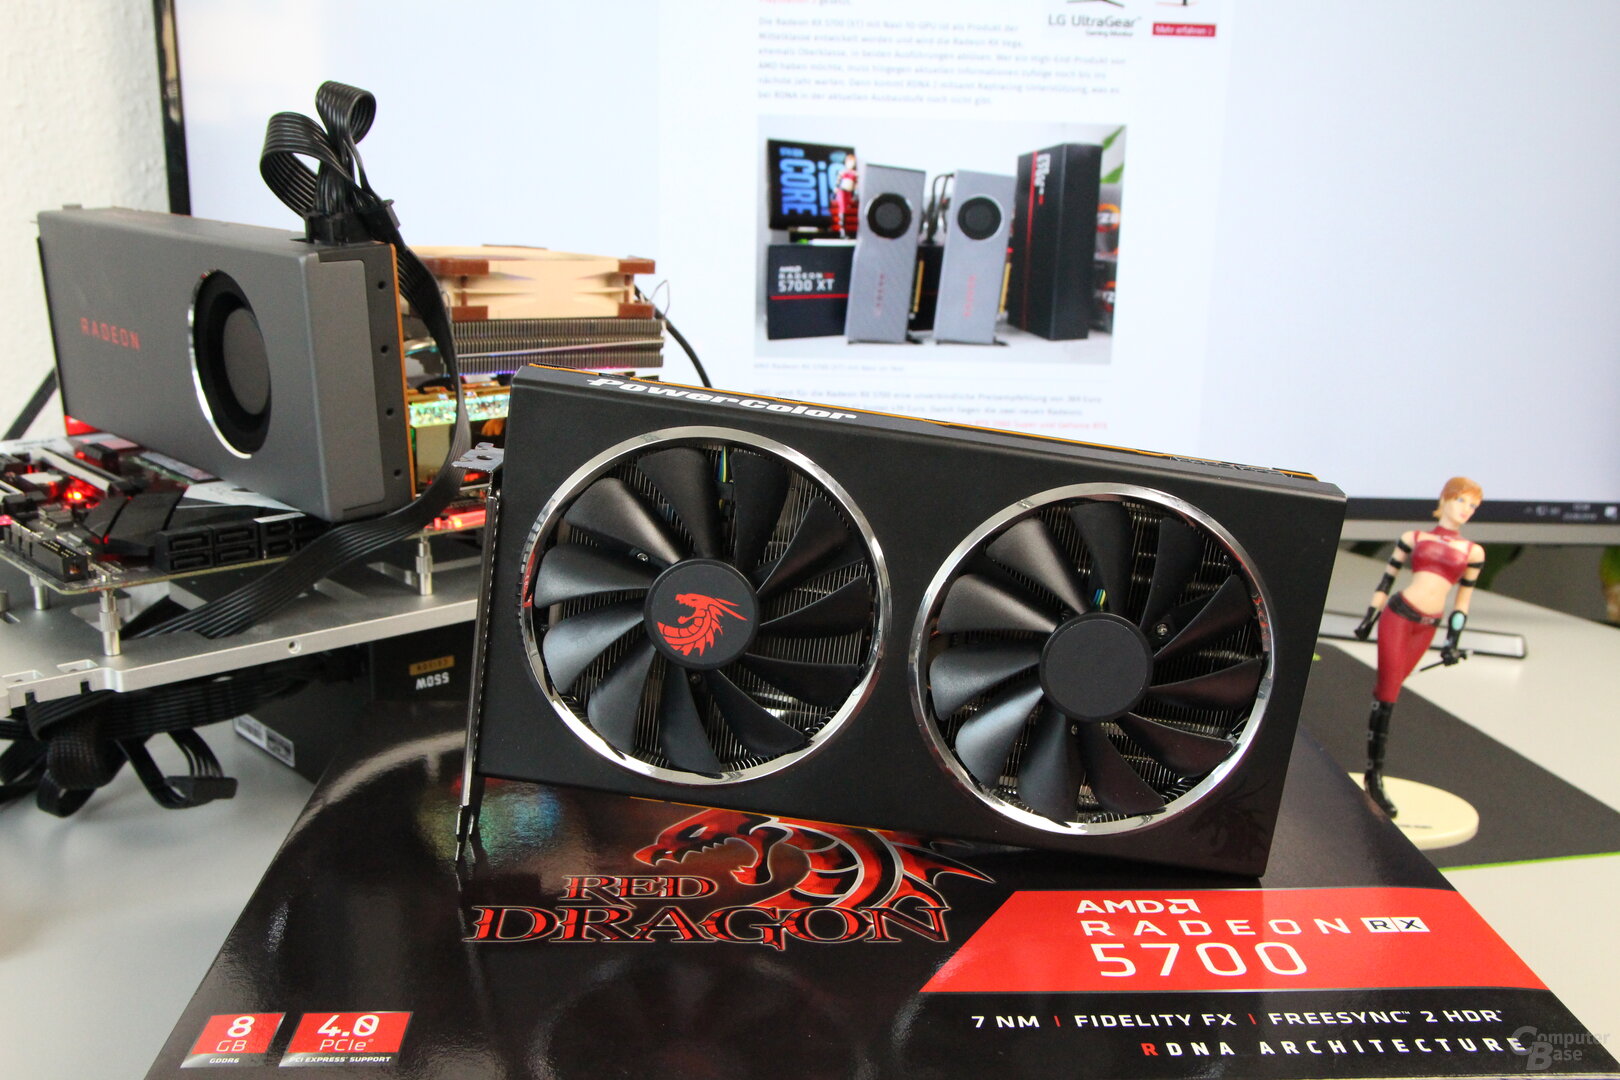 The PowerColor Radeon RX 5700 Red Dragon in the test